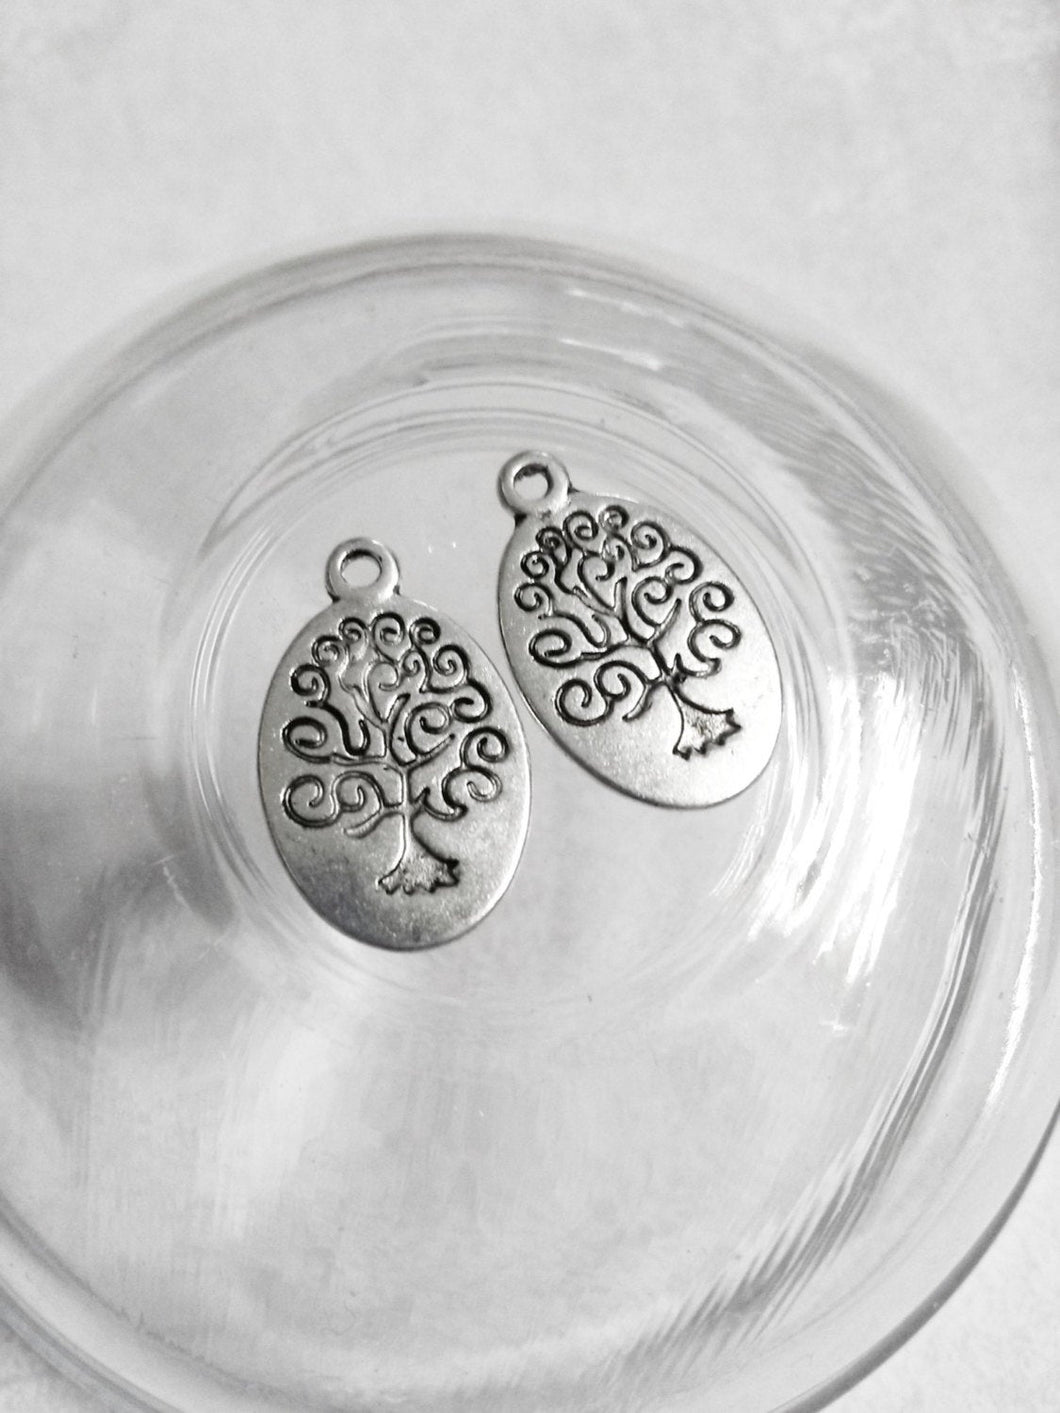 Tree Charms Tree of Life Charms Bulk Charms Wholesale Charms Antiqued Silver Oval Tree Pendants Stamped Tree Charms 50 pieces